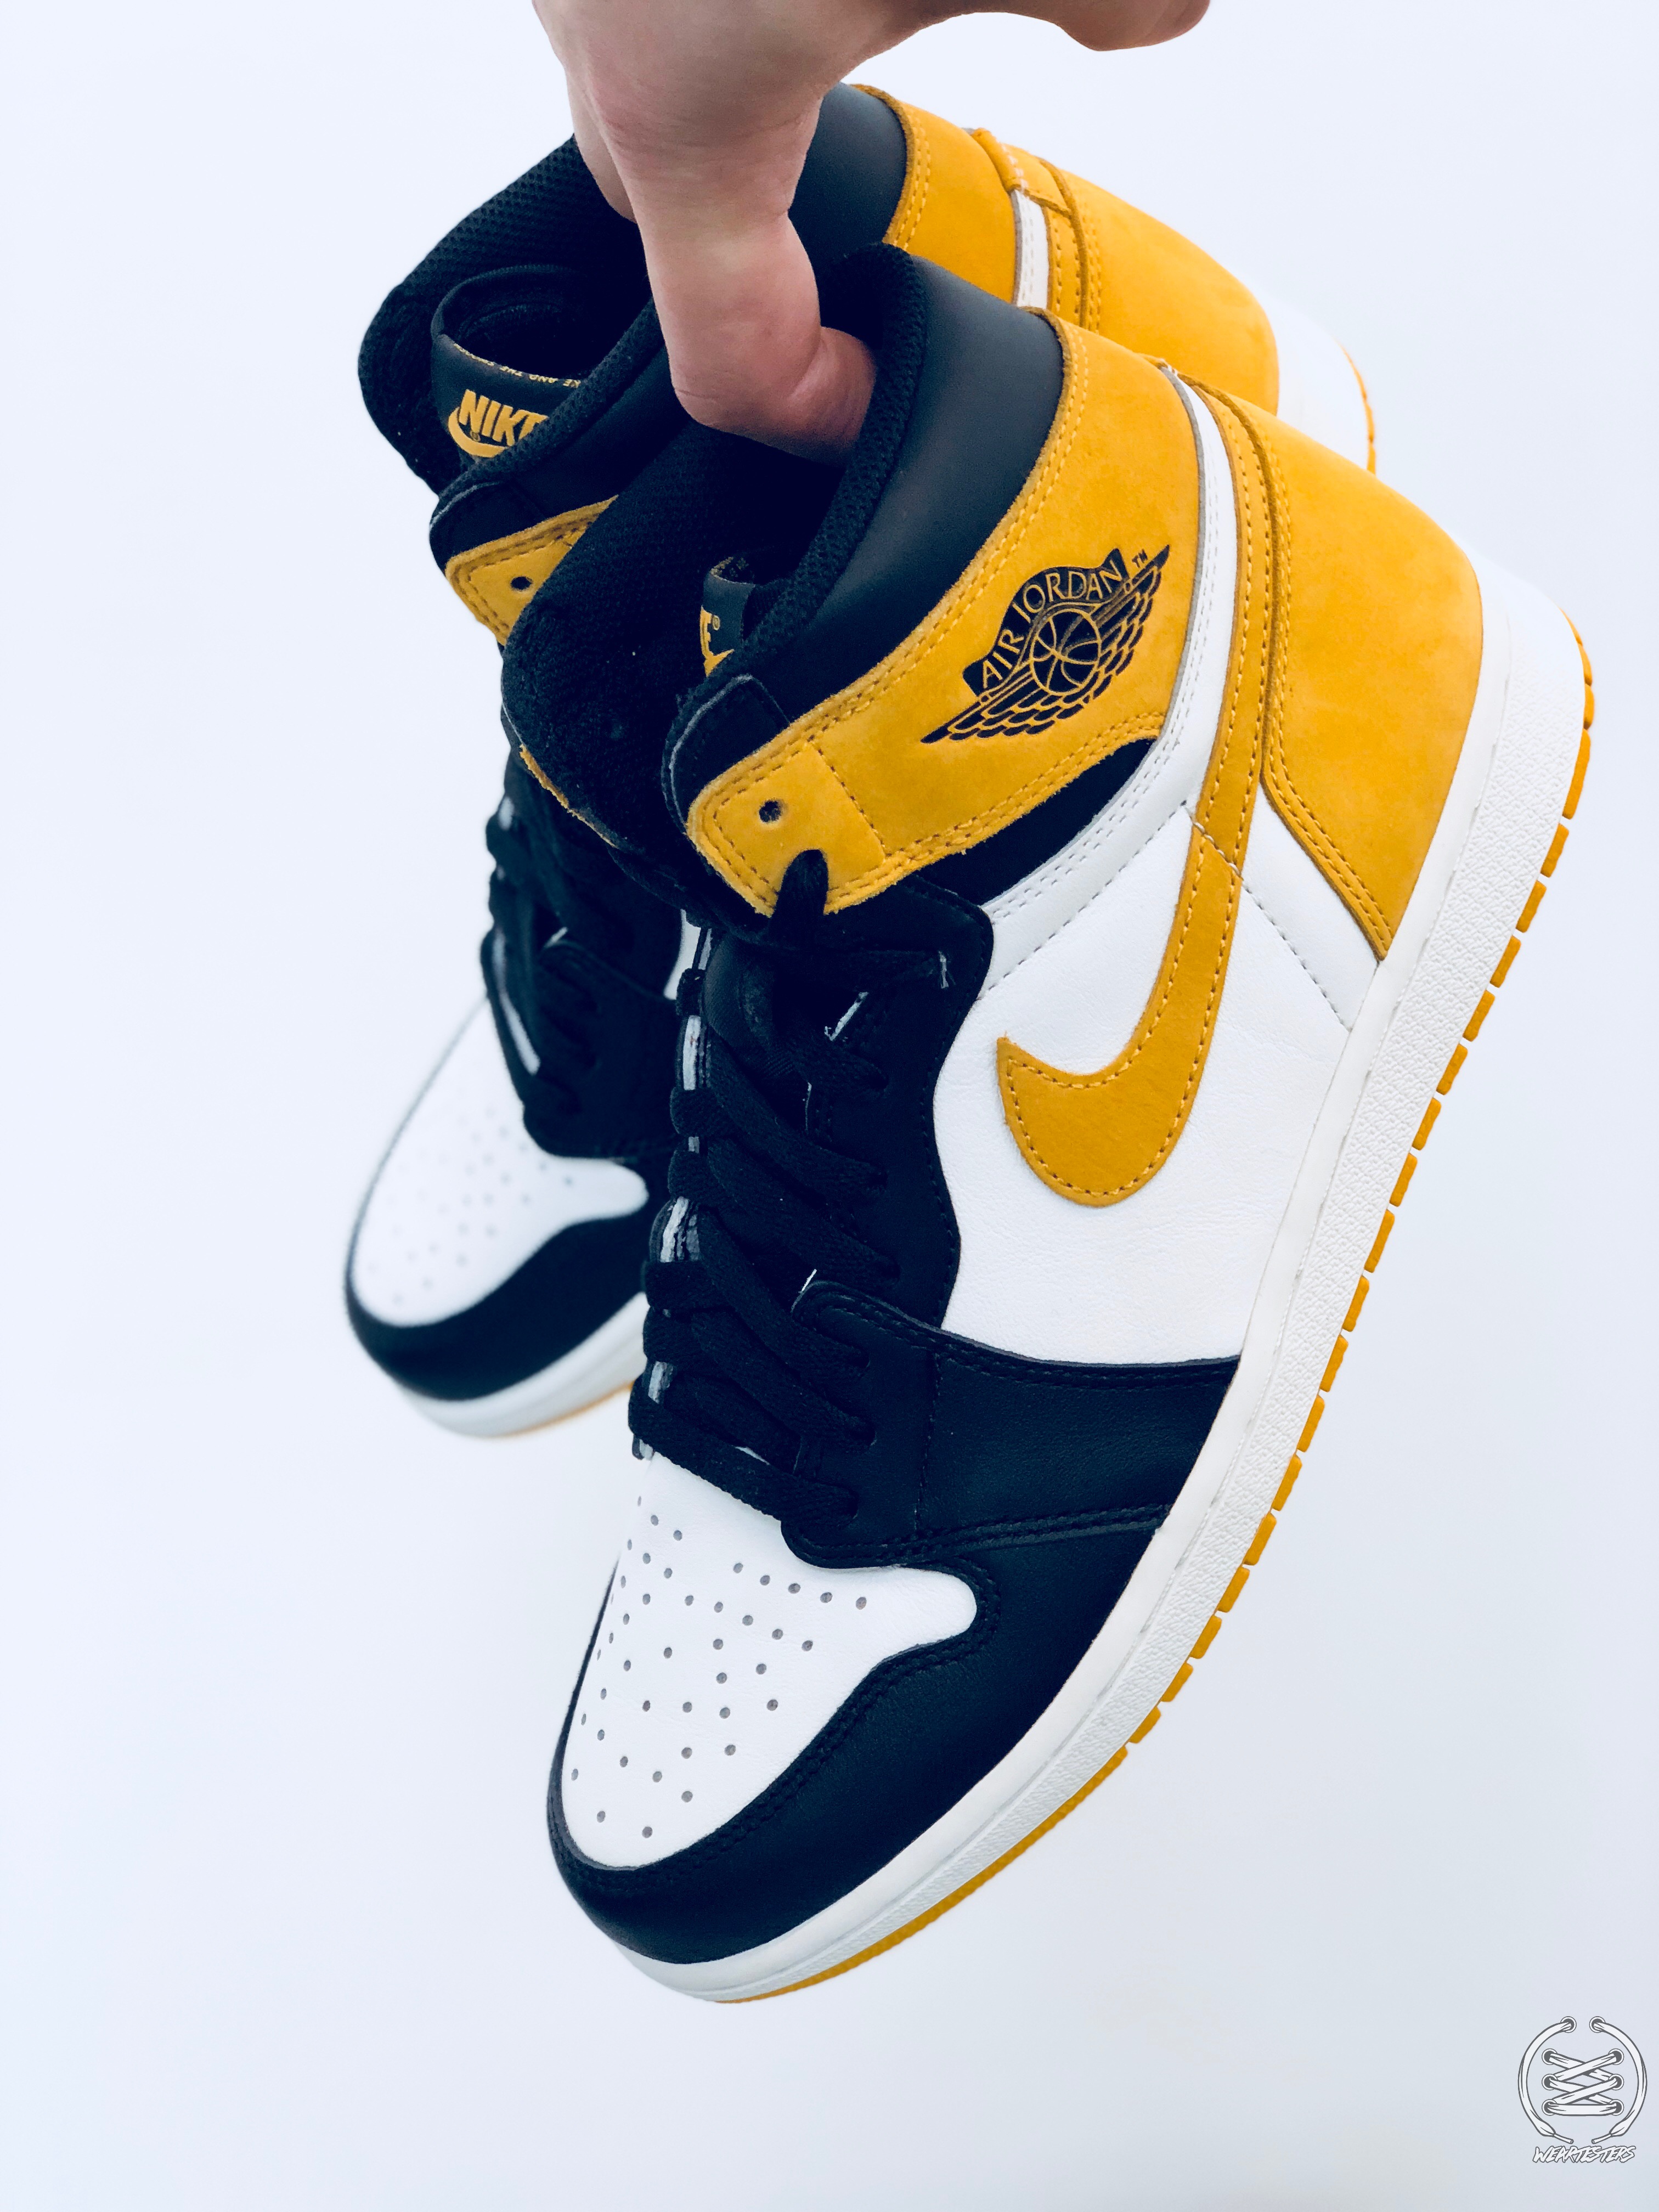 Air Jordan 1 Yellow Ochre Best Hand in the Game collection